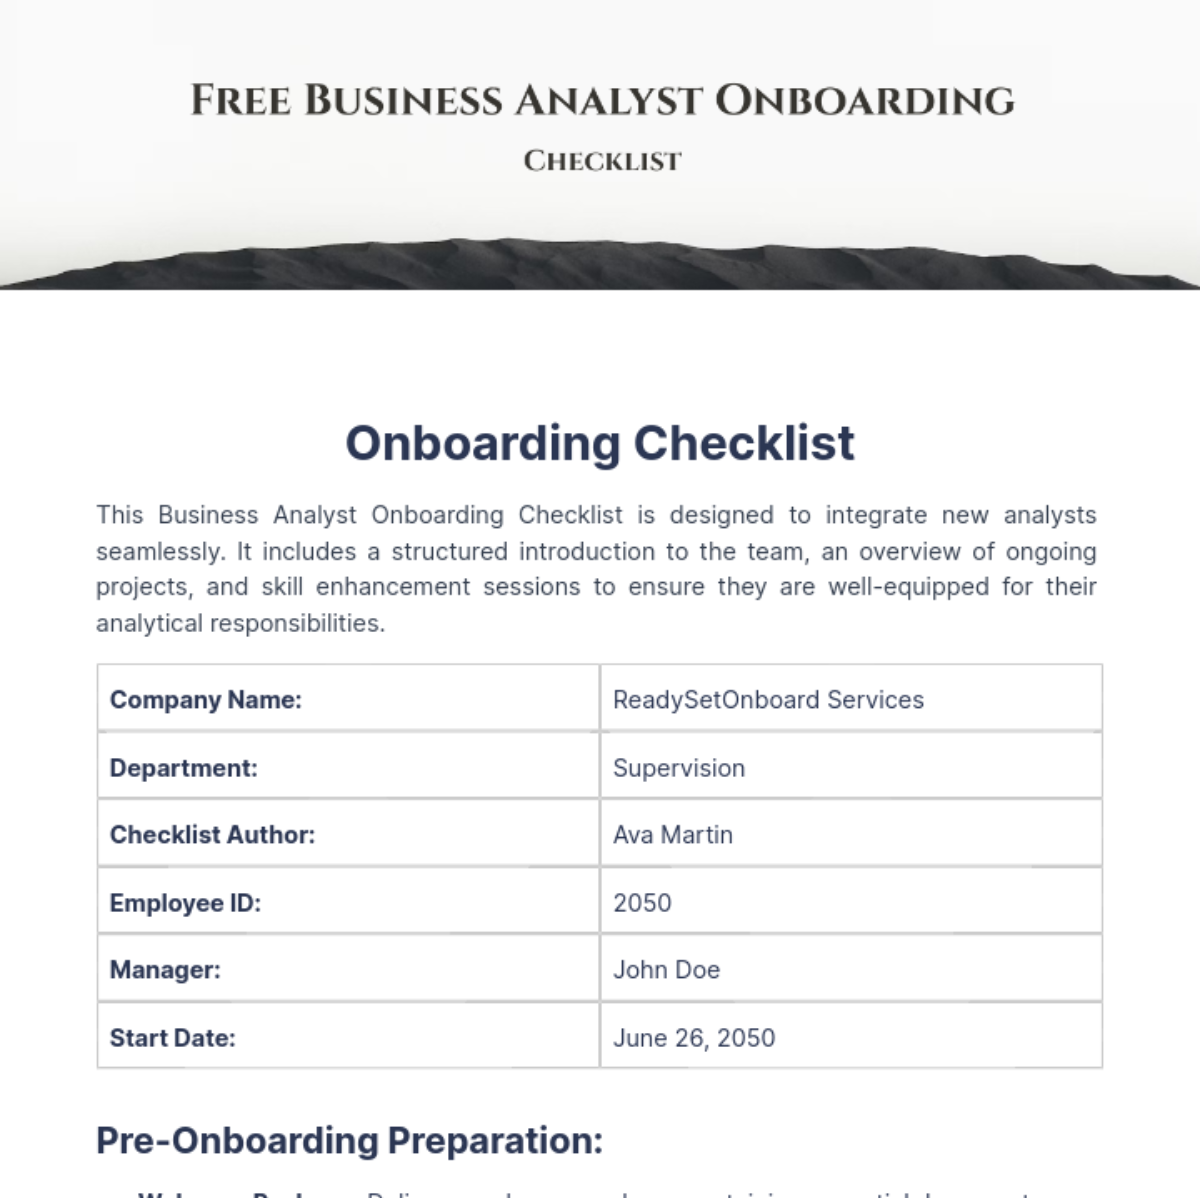 Free Business Analyst Onboarding Checklist Template